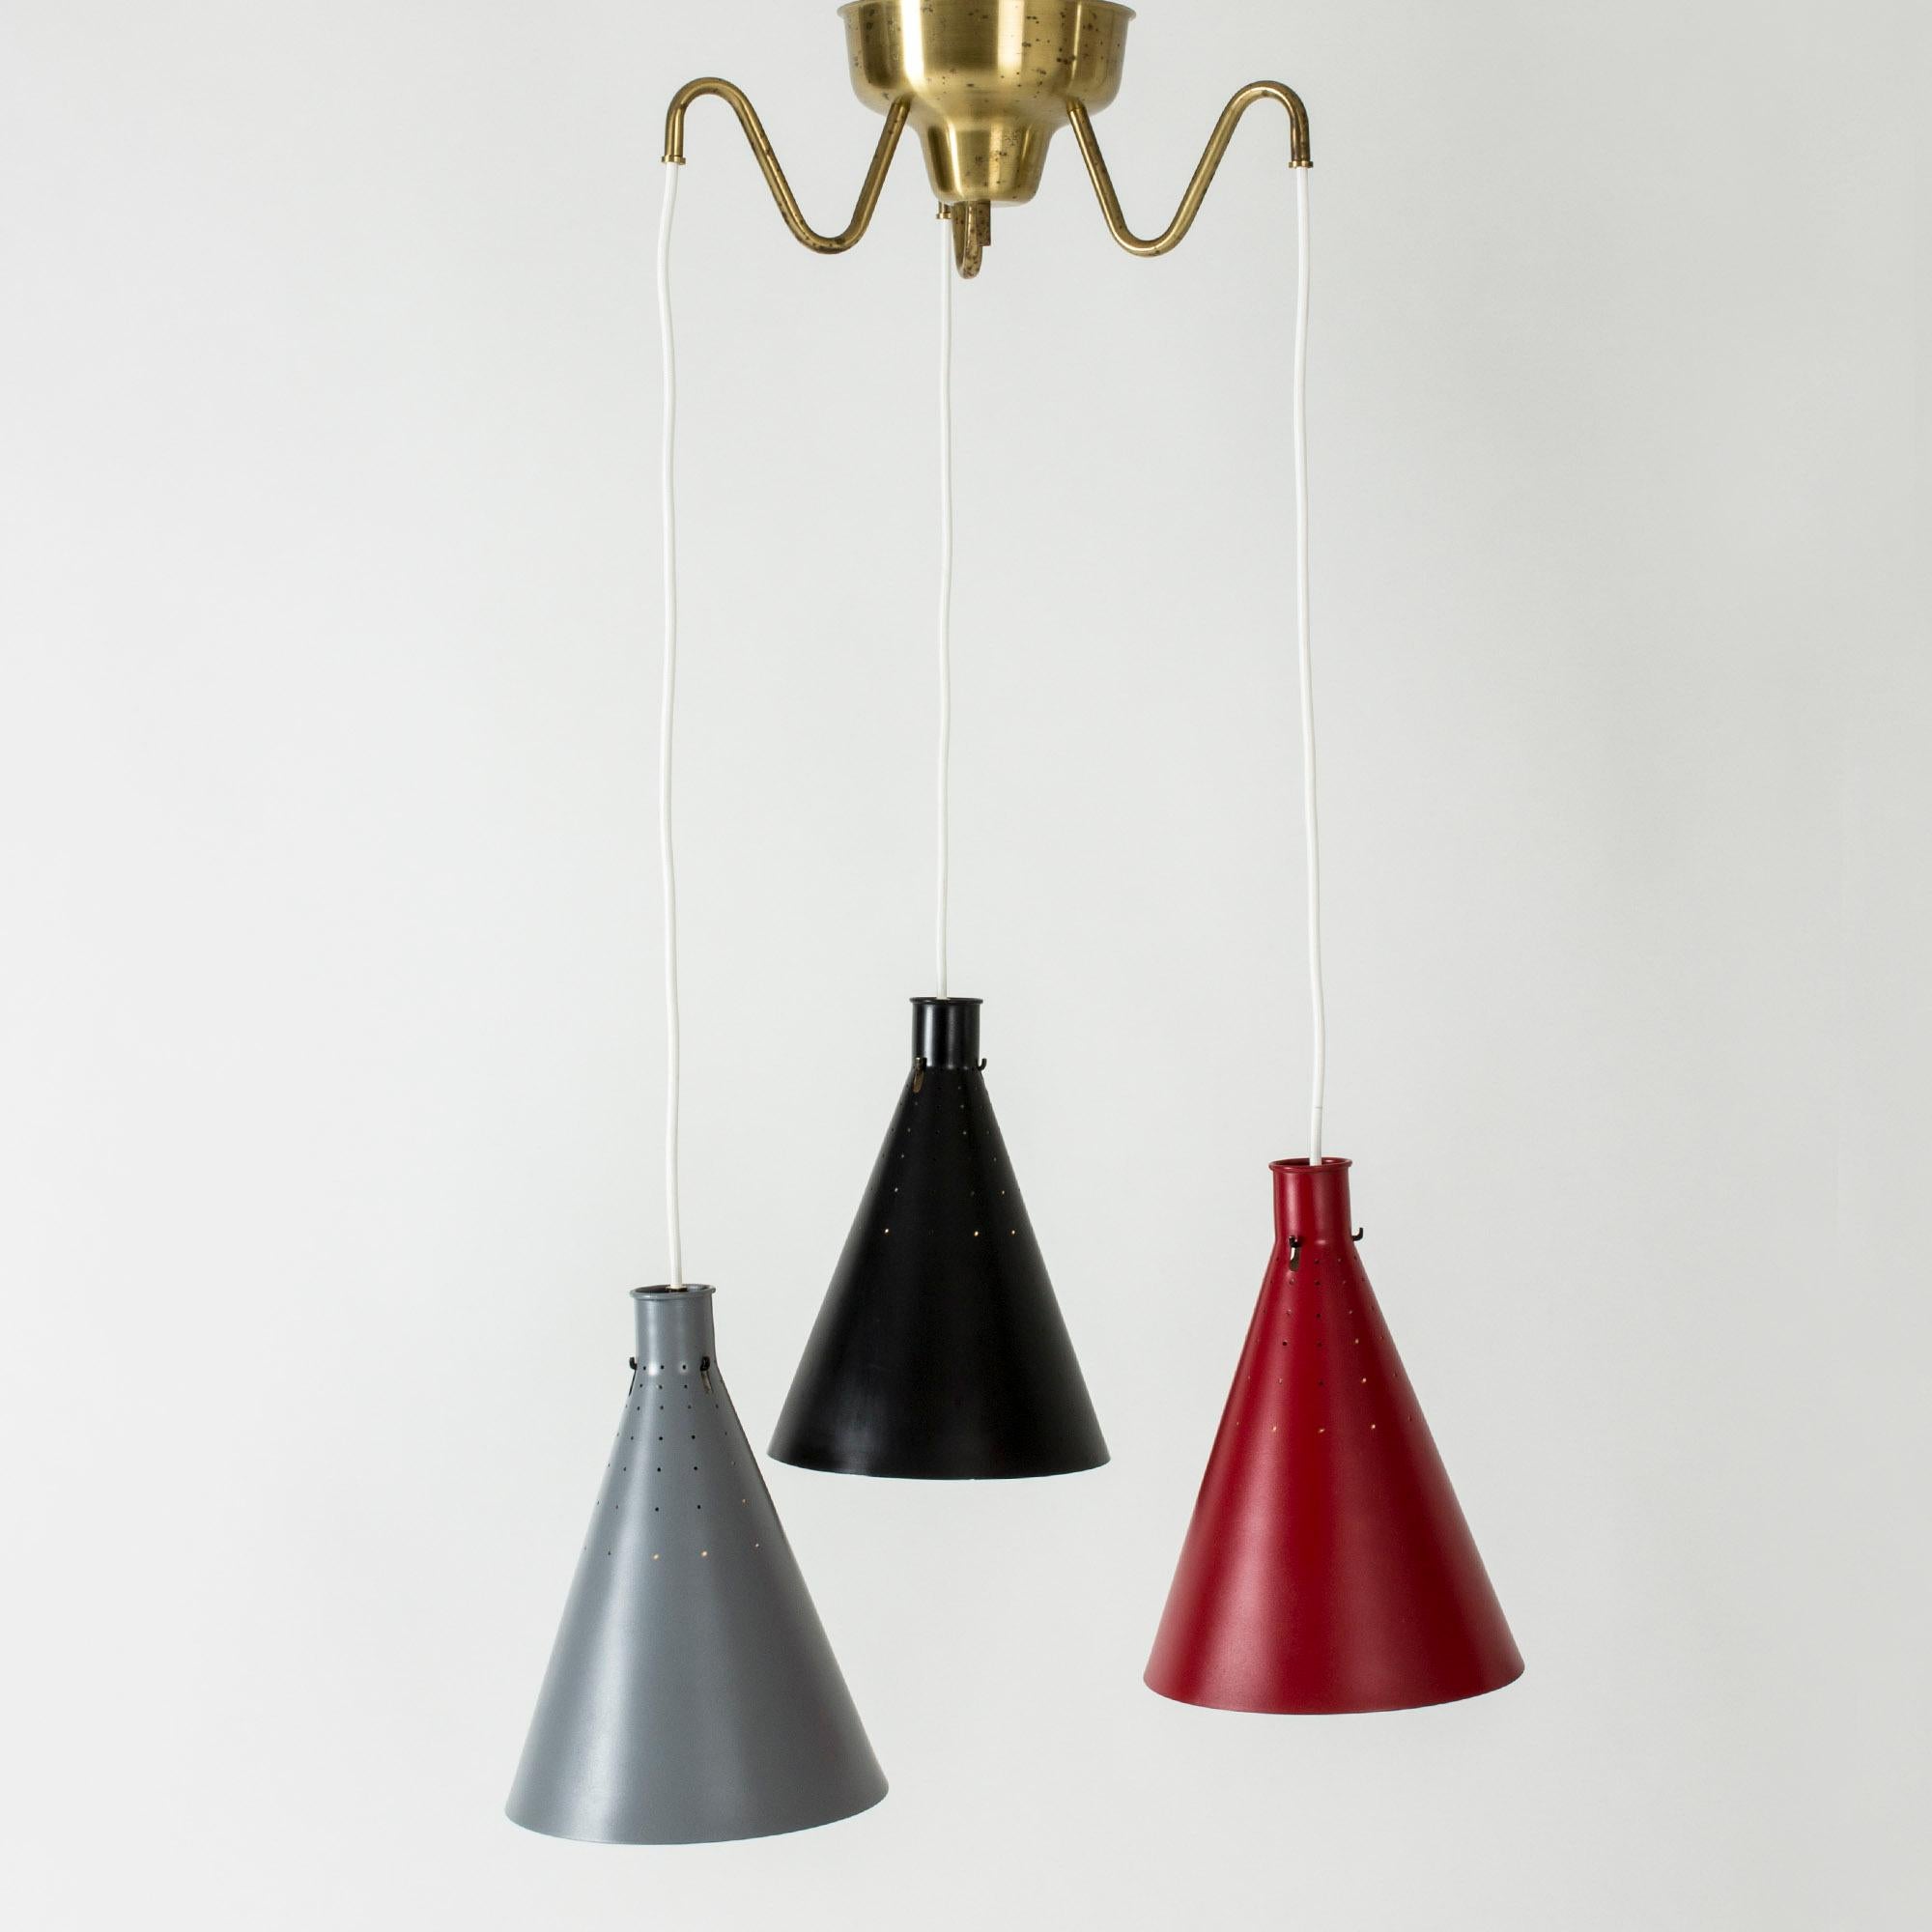 Elegant ceiling lamp with three lamp shades set at different heights, designed by Alf Svensson. Brass ceiling cup, metal shades lacquered red, grey and black. Shades perforated with small holes.